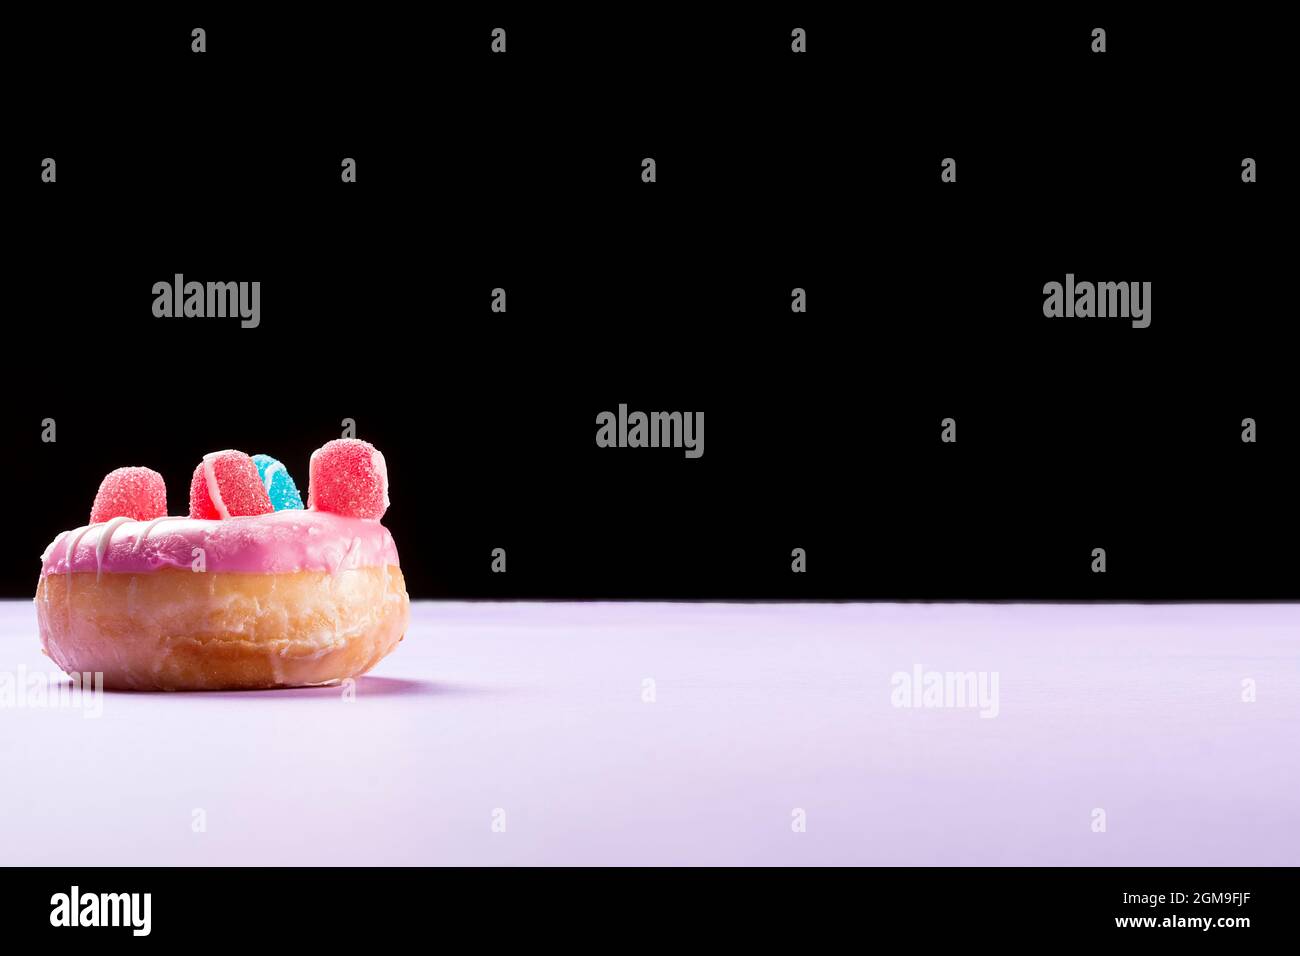 Photograph of a pink donuts decorated with jelly beans and drawn with white chocolate.The photo is taken in horizontal format on a lilac cardboard and Stock Photo